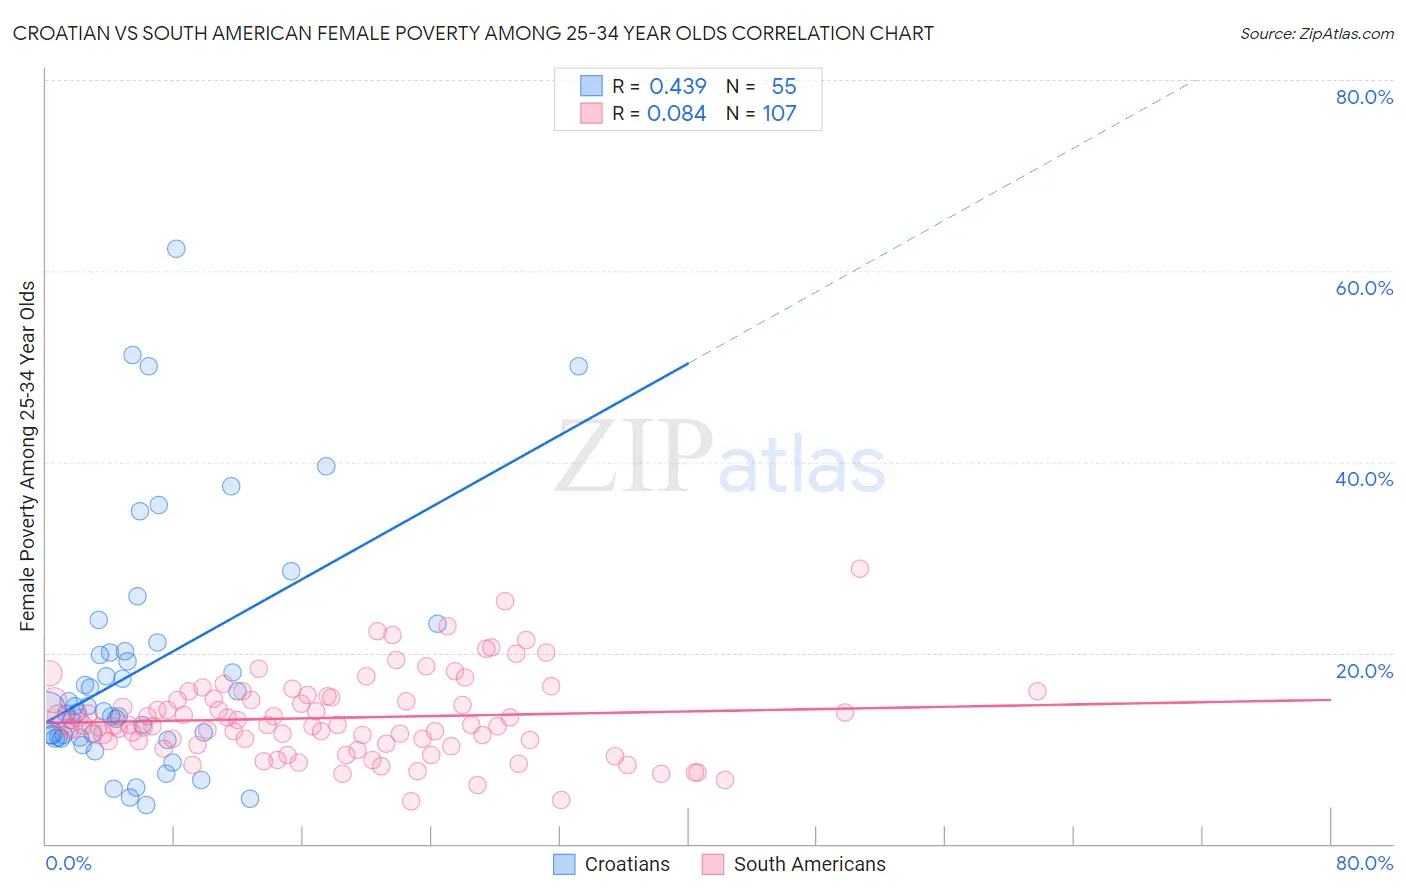 Croatian vs South American Female Poverty Among 25-34 Year Olds